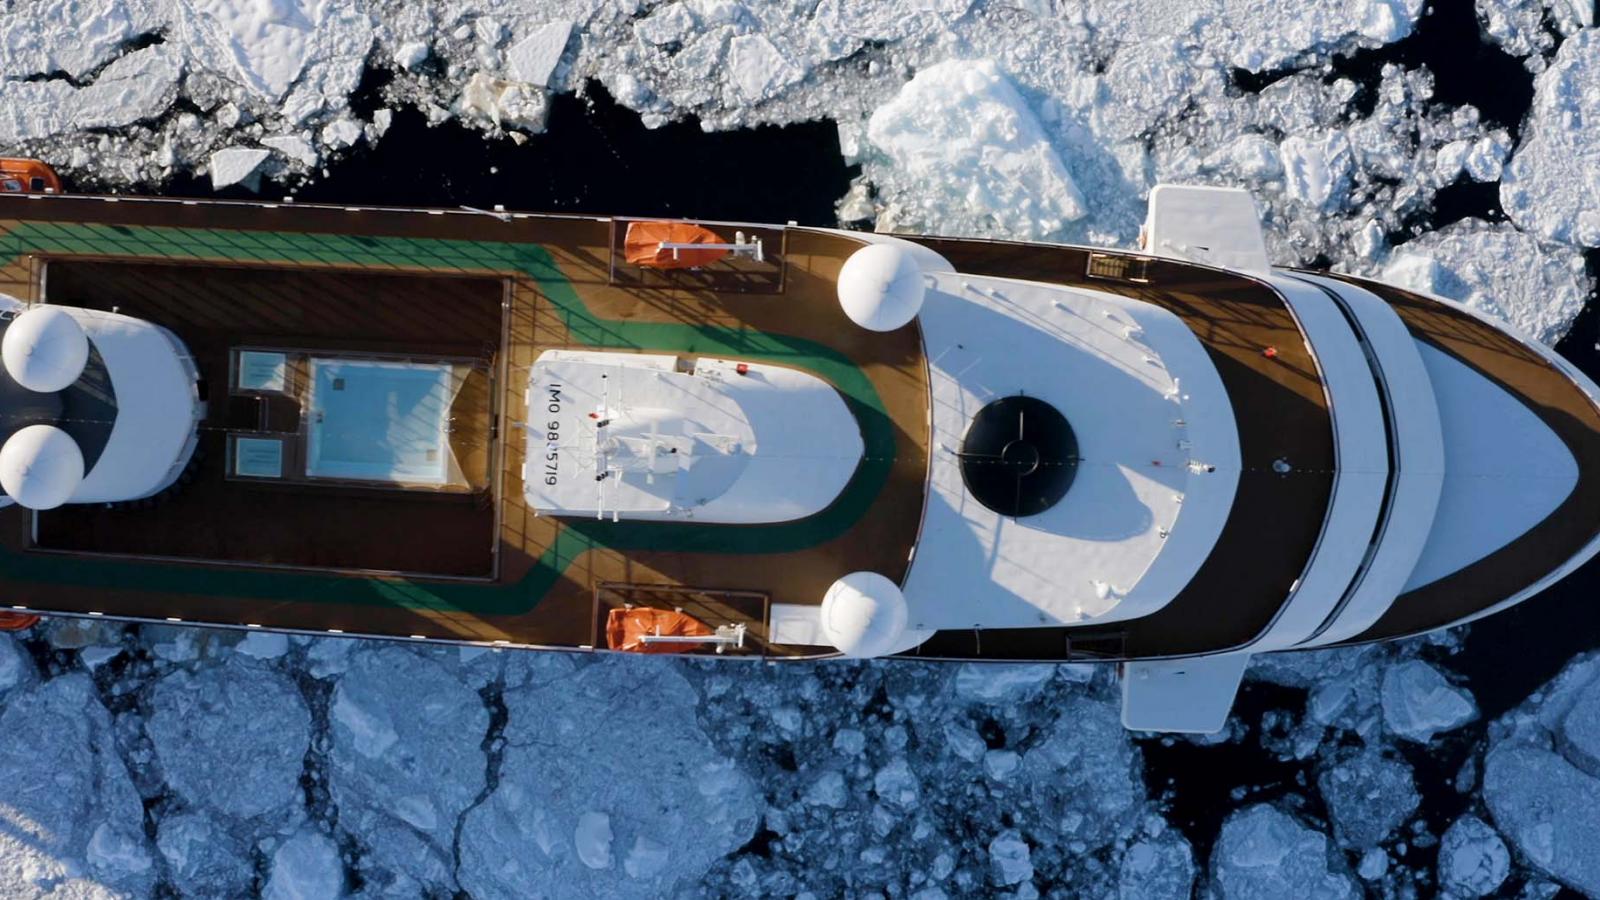 Welcome aboard: exploring the Arctic by boat